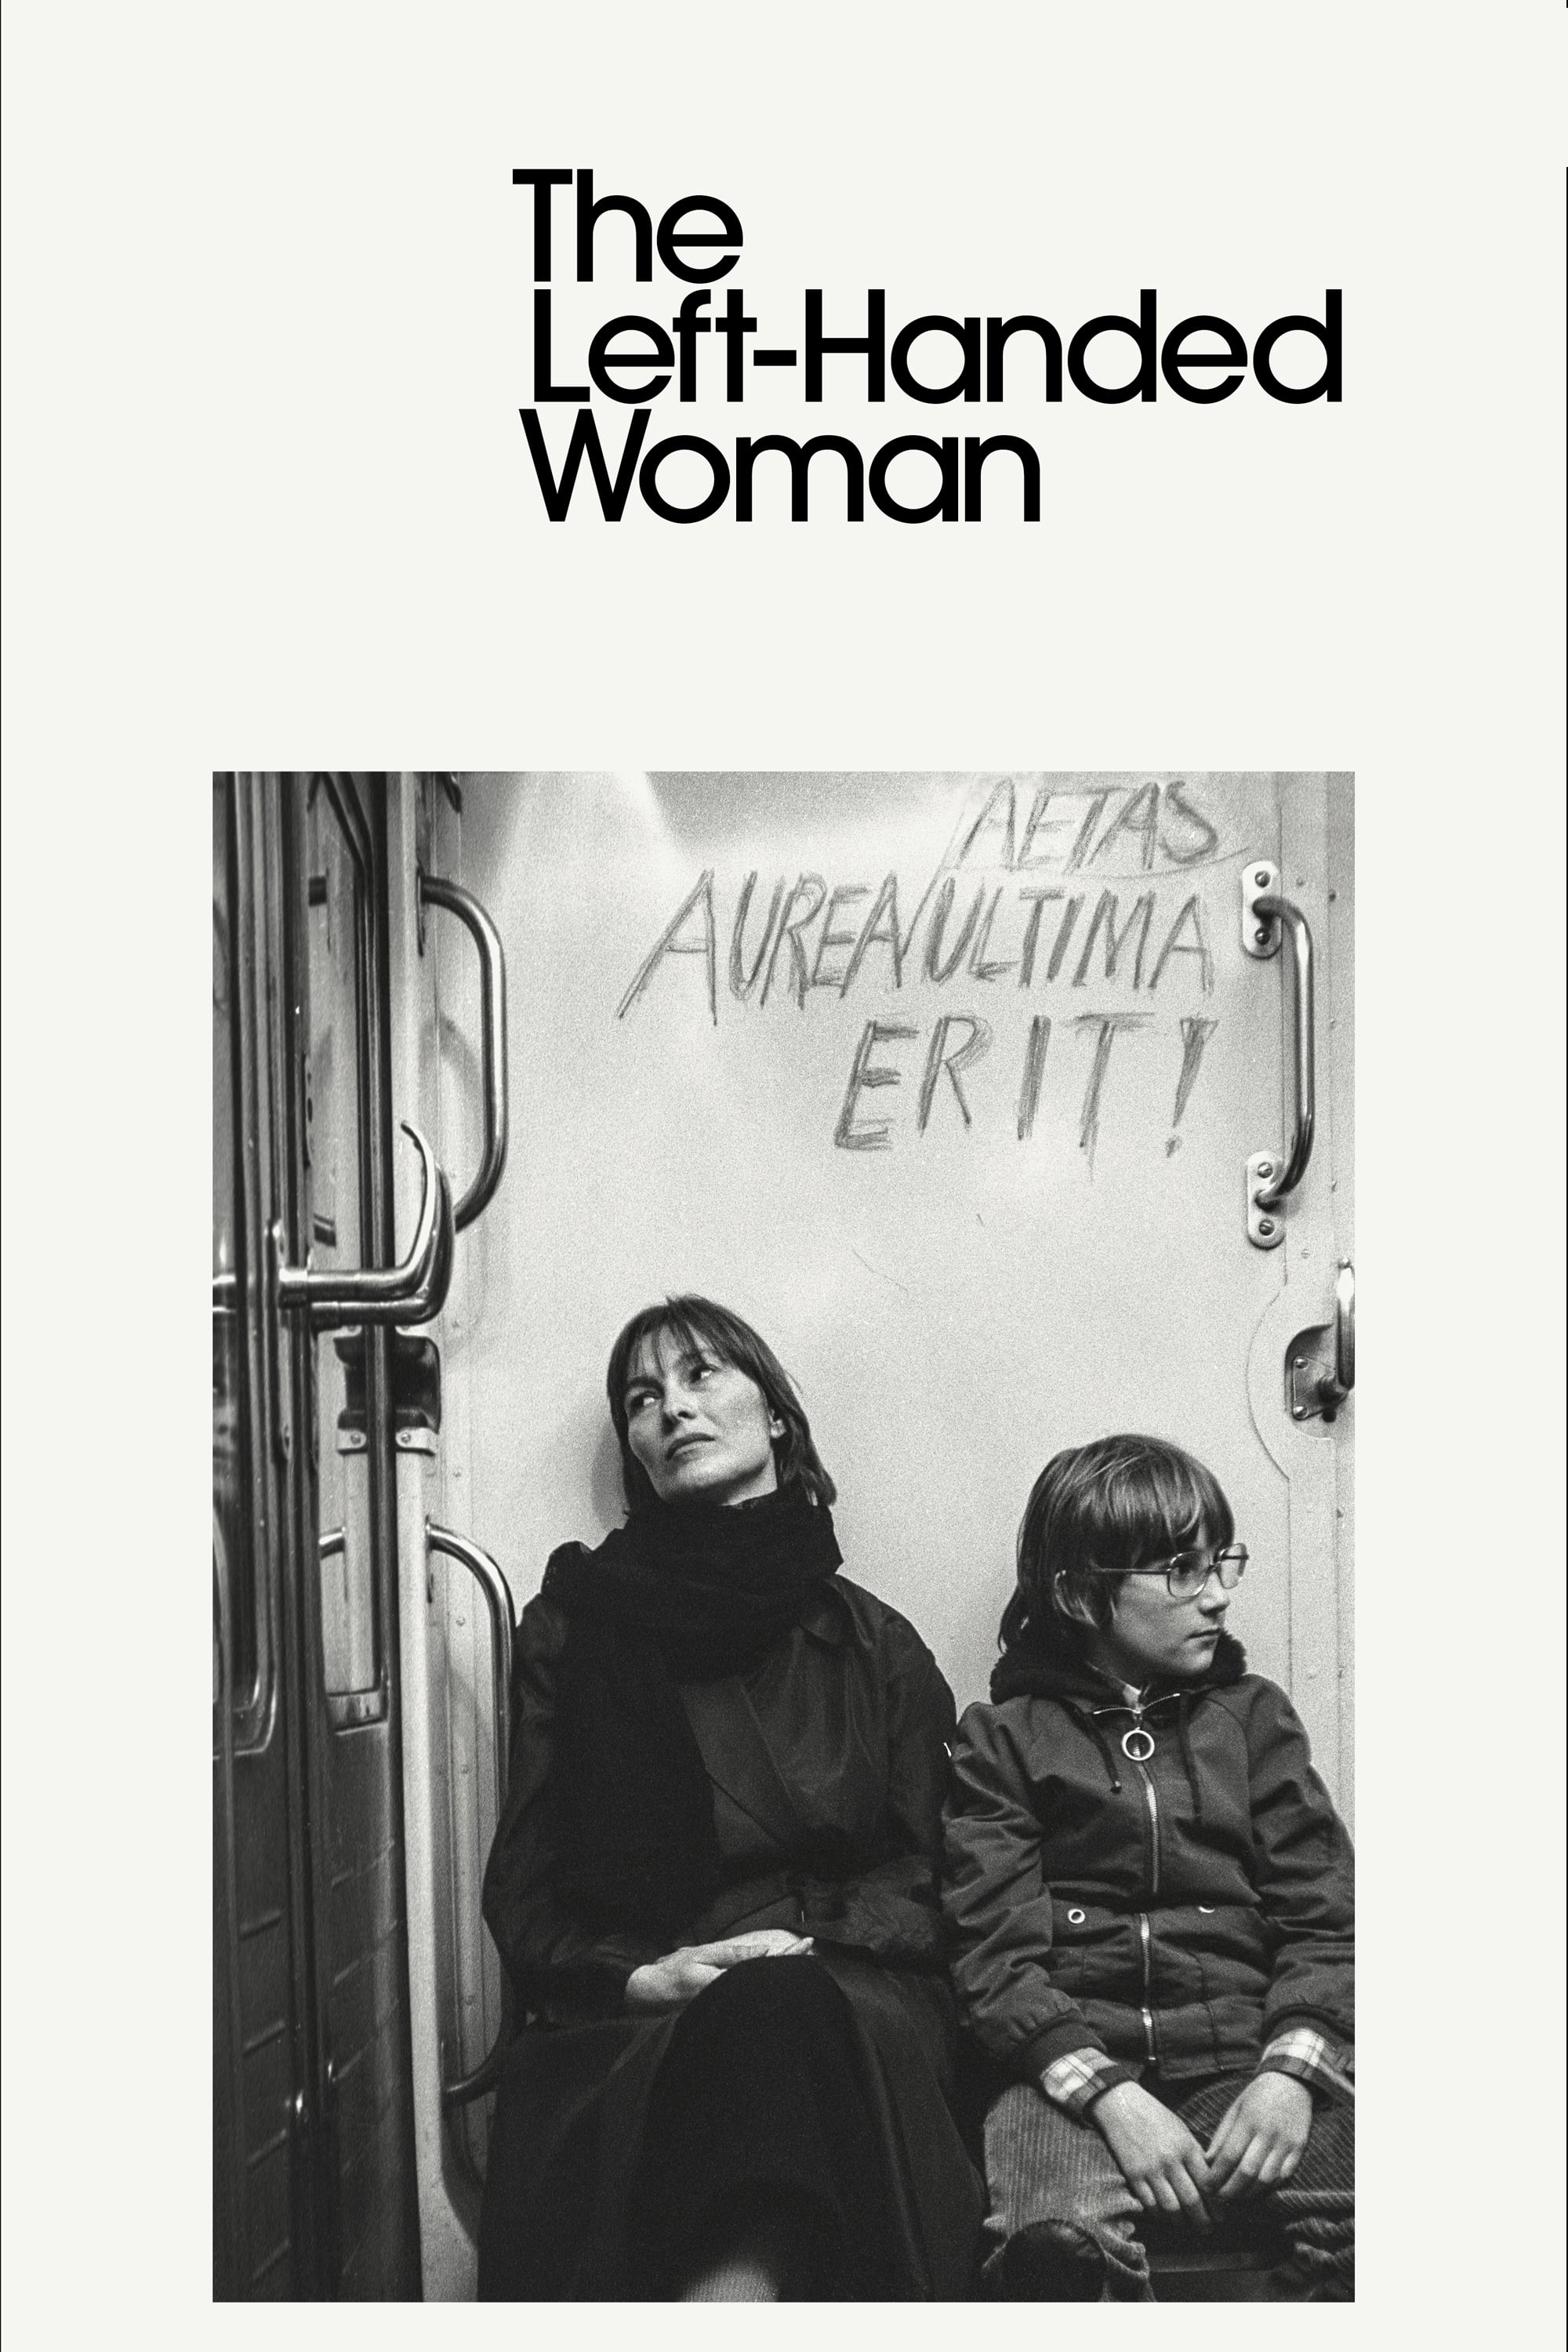 The Left-Handed Woman (1978)